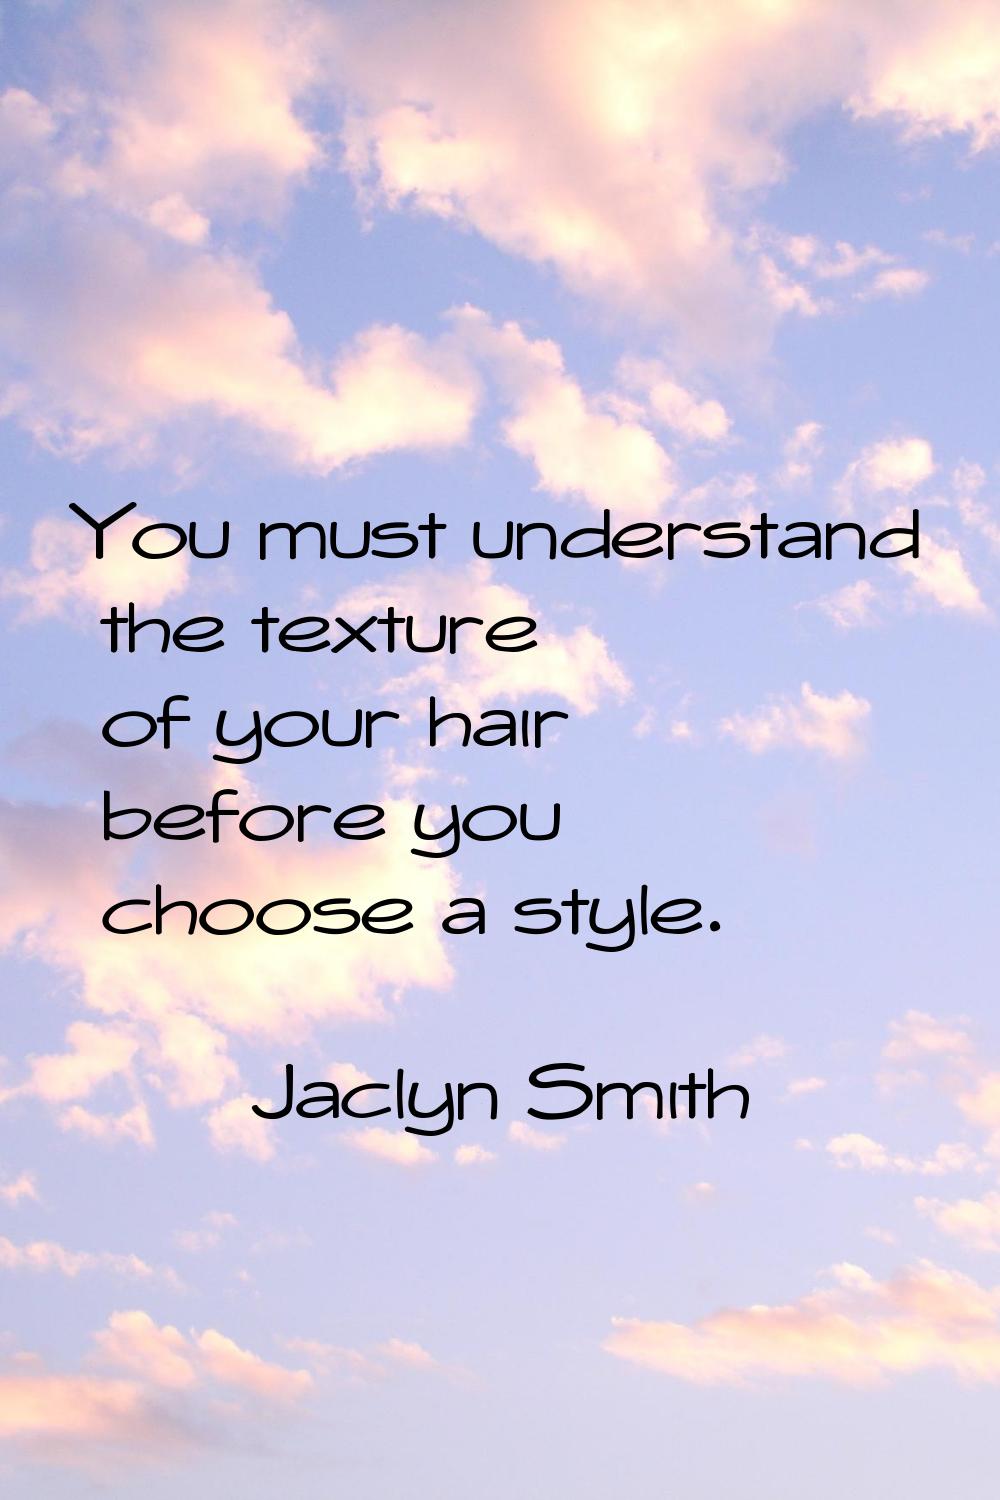 You must understand the texture of your hair before you choose a style.